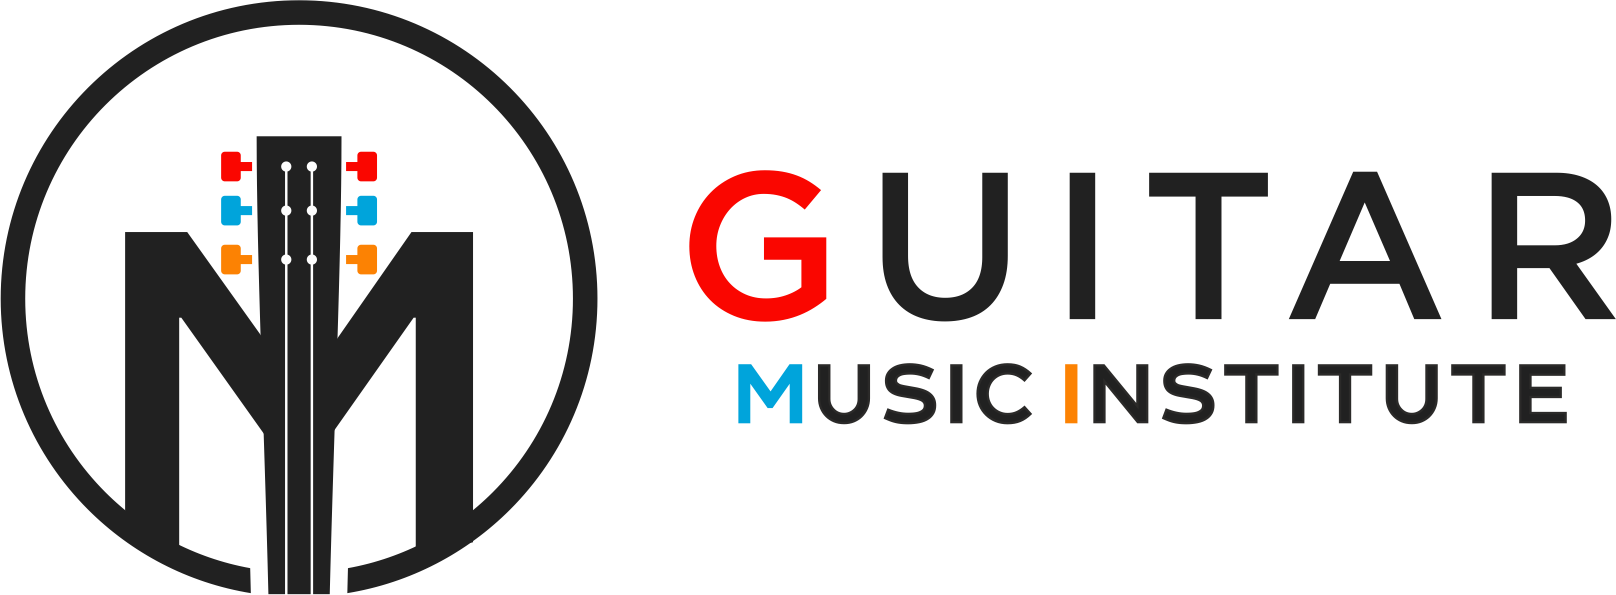 Jazz Fusion Play Along SCORE - You Lead The Band! FREE – GMI - Guitar and  Music Institute Online Shop